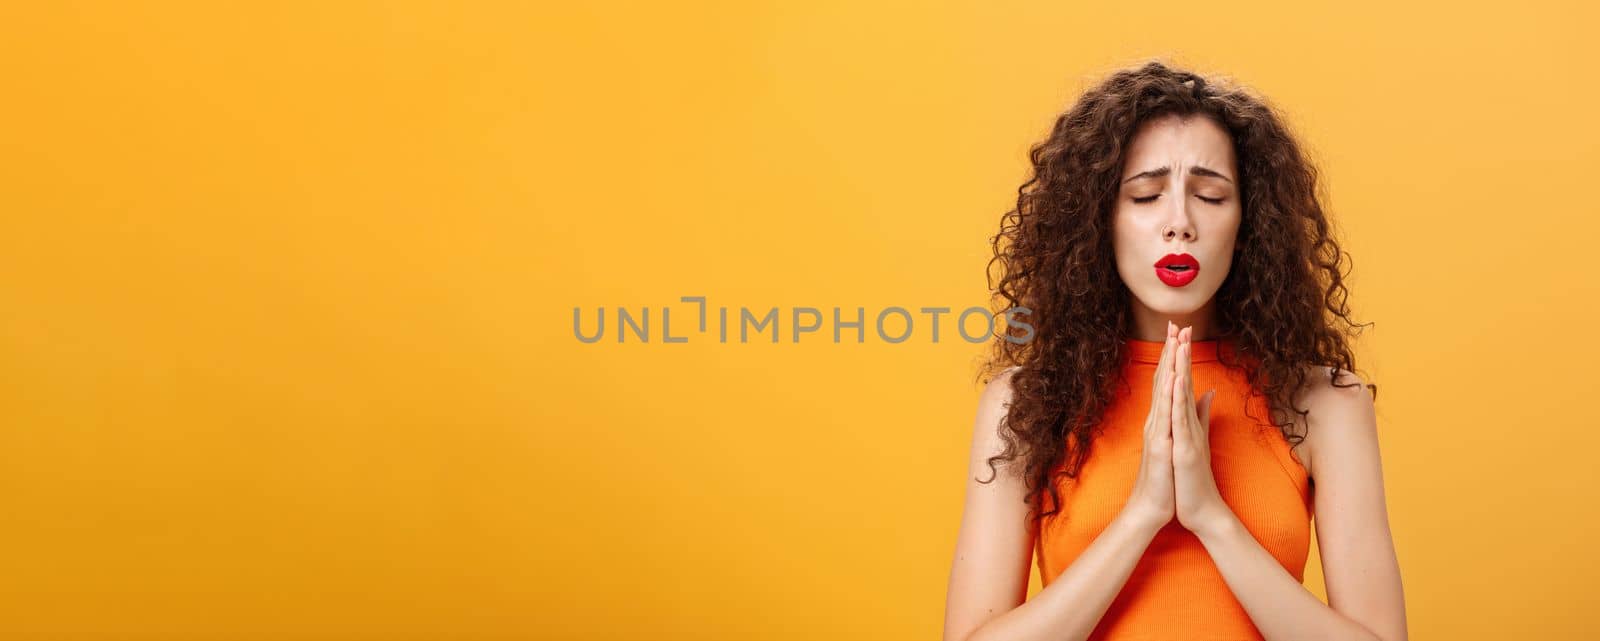 Nervous and concerned woman. with curly hairstyle feeling hopeful praying with closed eyes and frowned eyebrows holding hands in pray near chest hopefully dreaming troubled will solve over orange wall. Emotions and body language concept